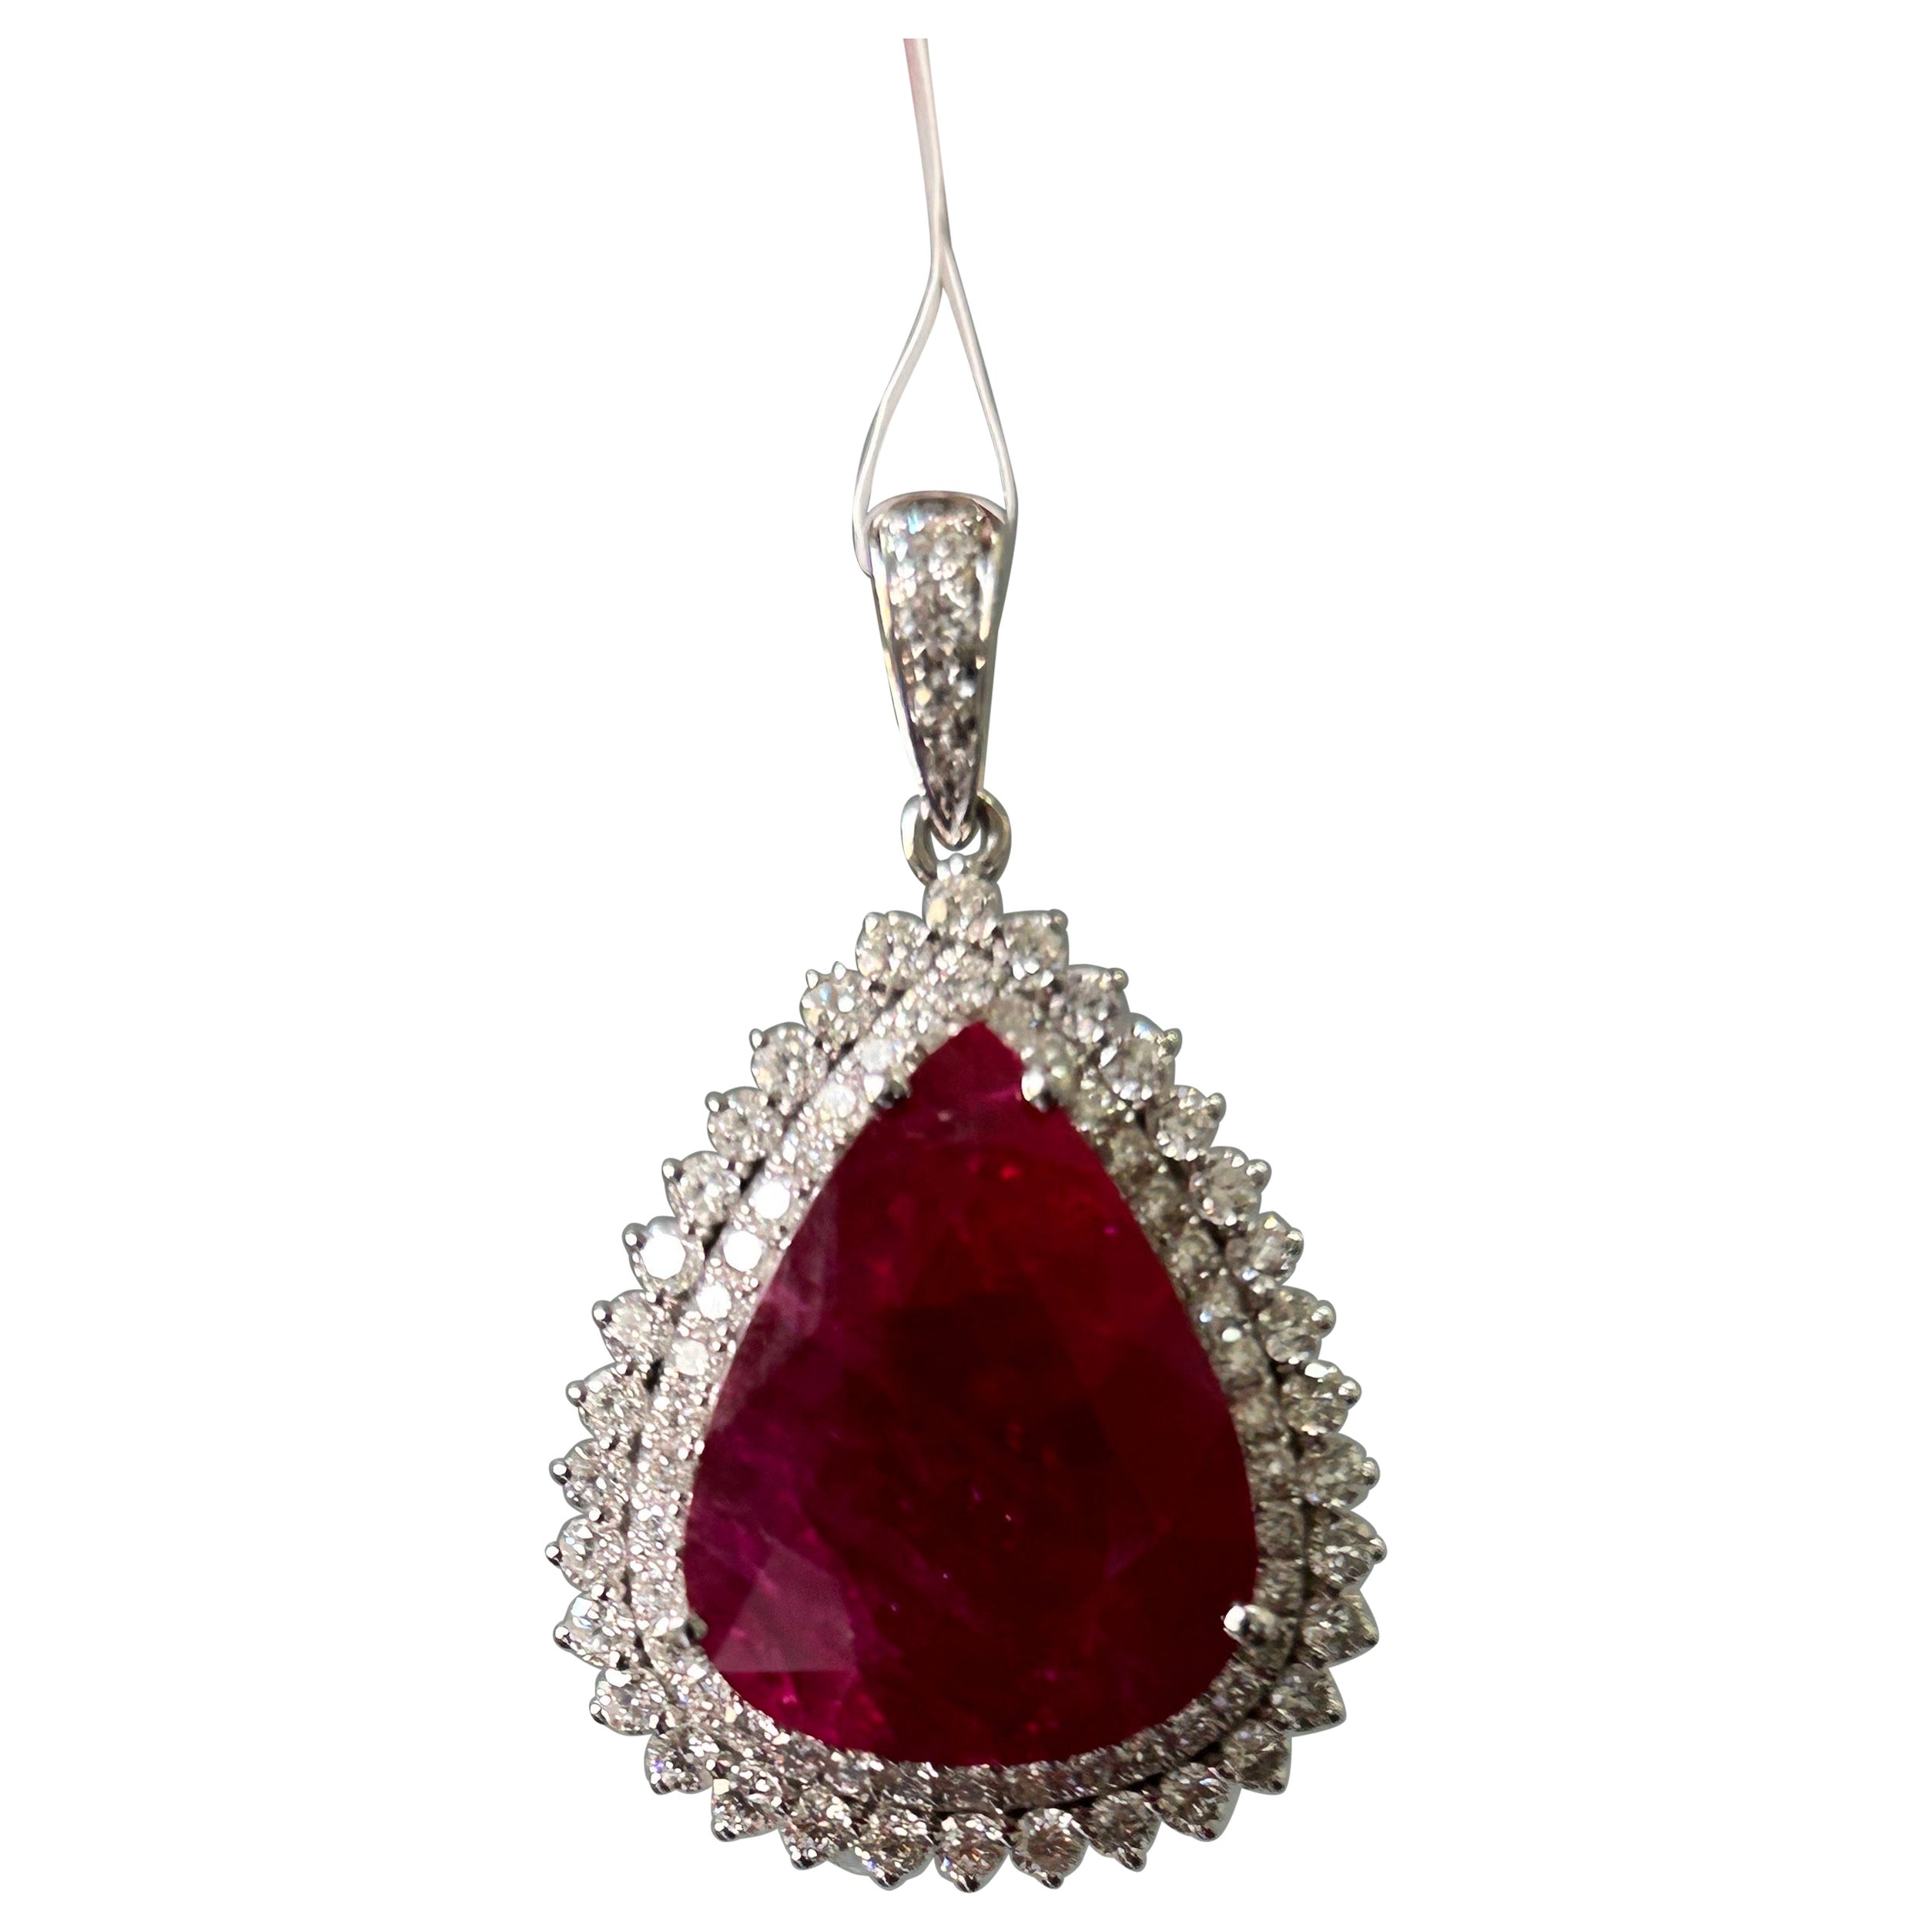 10.98 Carat Natural Mozambique Ruby and Diamond Pendant For Sale